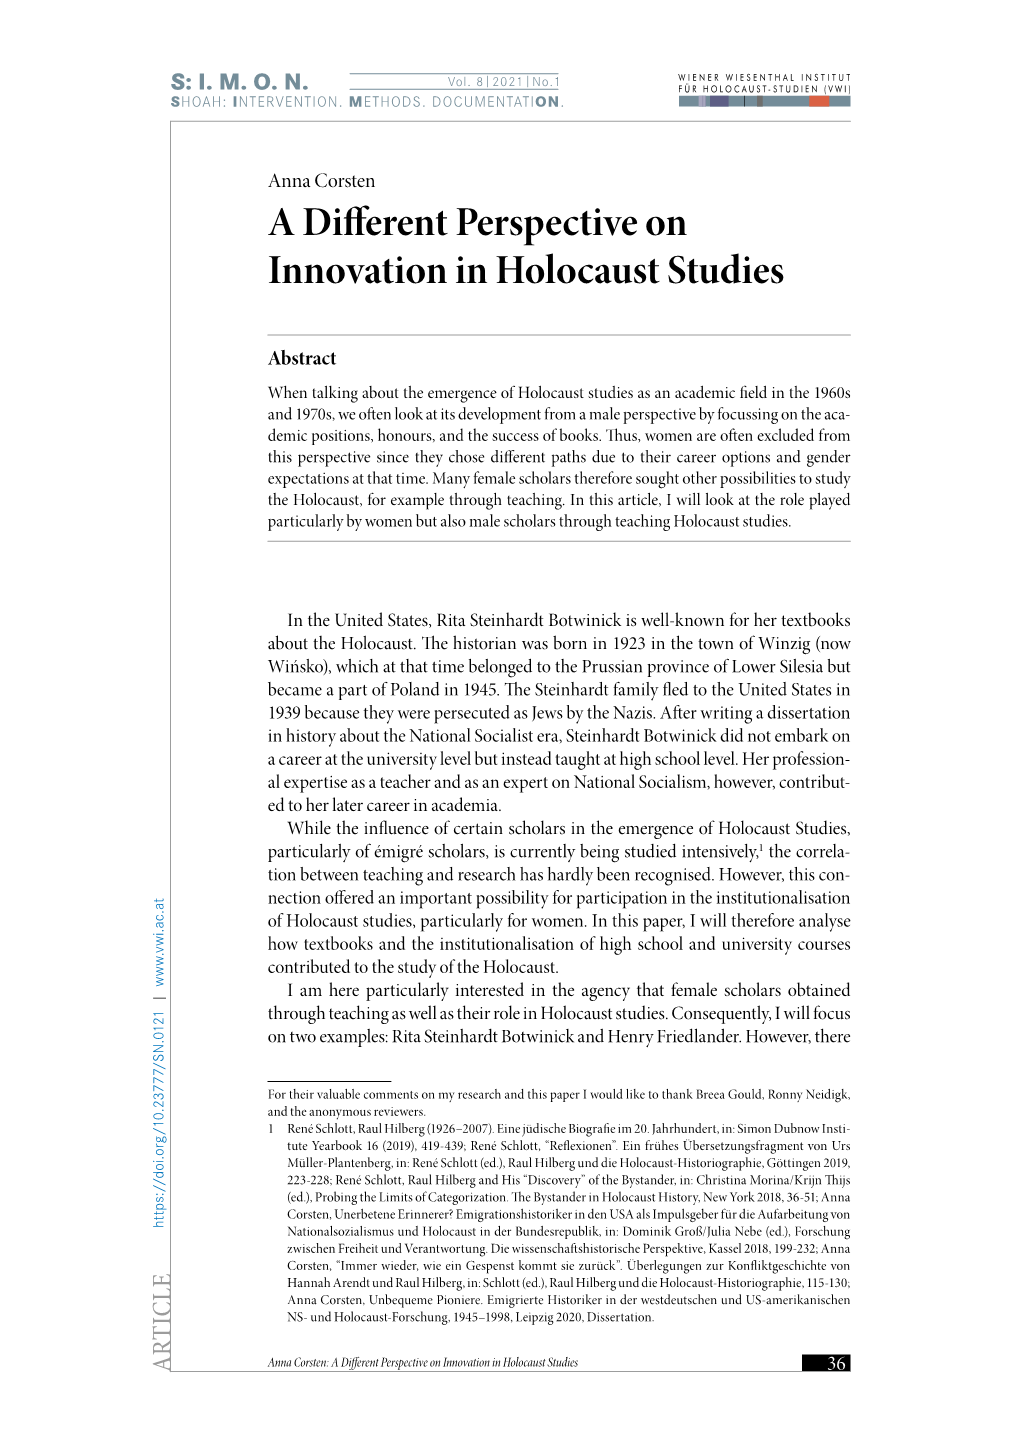 A Different Perspective on Innovation in Holocaust Studies